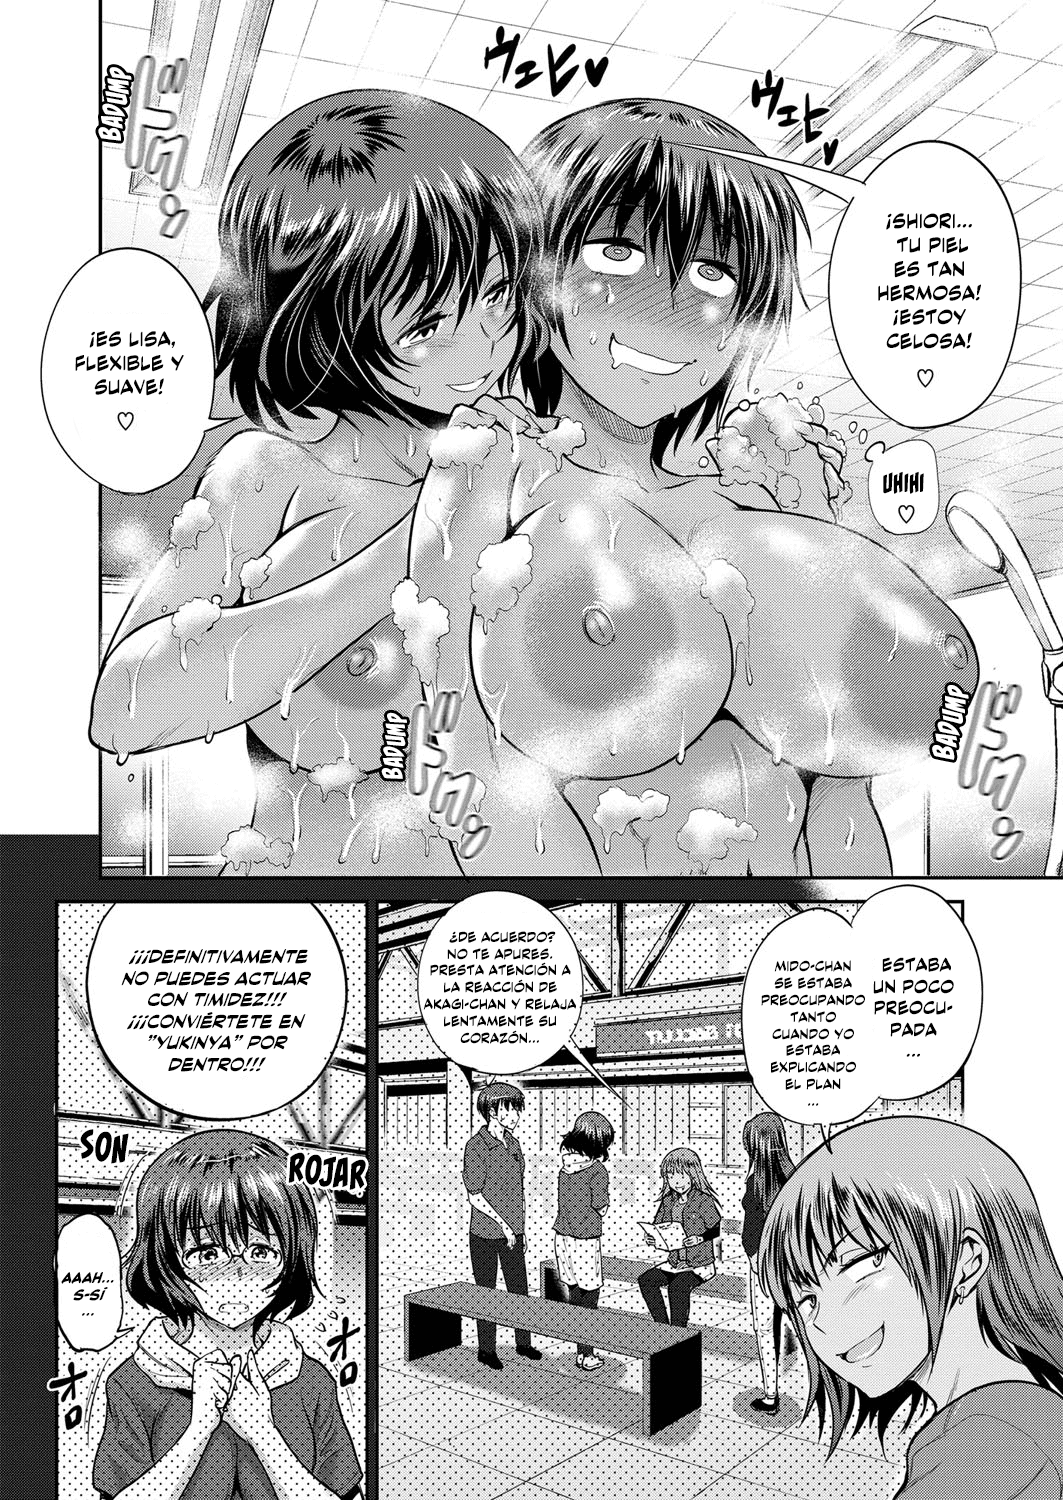 [DISTANCE] Joshi Lacu! - Girls Lacrosse Club ~2 Years Later~ Cap.08 (COMIC ExE 12) [Español] [NicoNiiScans] [Digital] [DISTANCE] じょしラク! ～2 Years Later～ 第8話 (コミック エグゼ 12) [スペイン翻訳] [DL版]